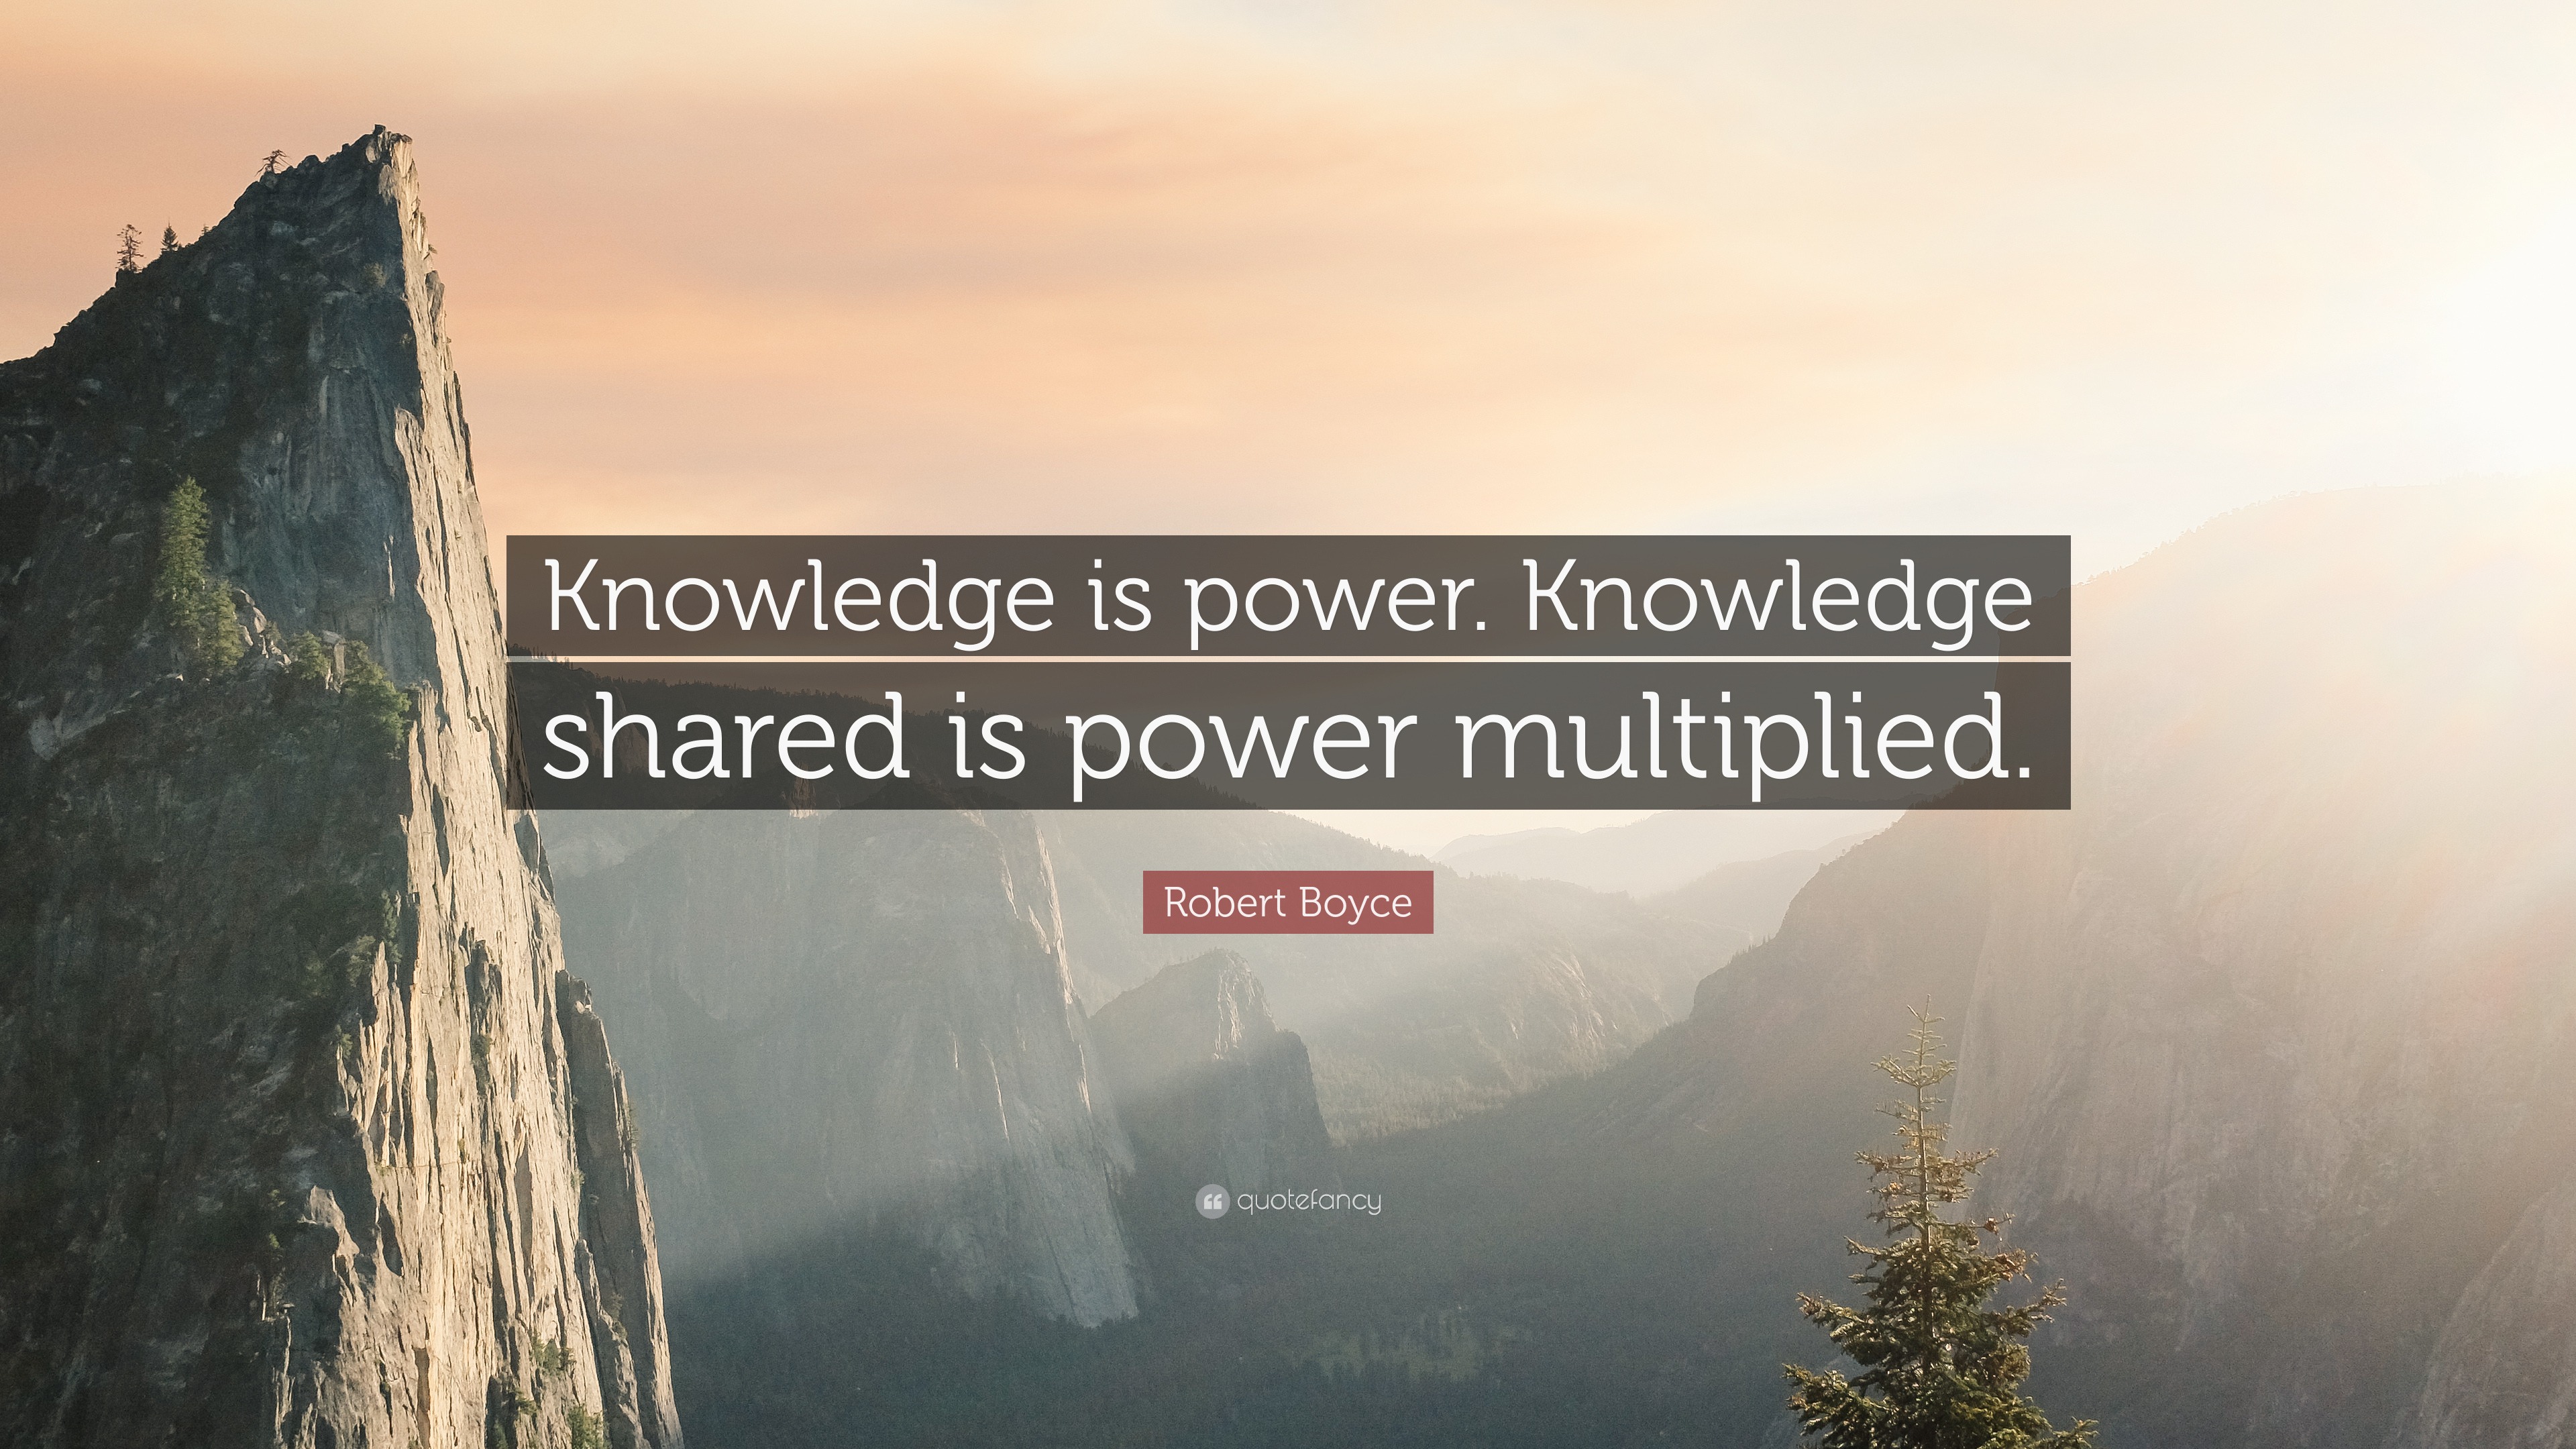 Robert Boyce Quote: “Knowledge is power. Knowledge shared is power